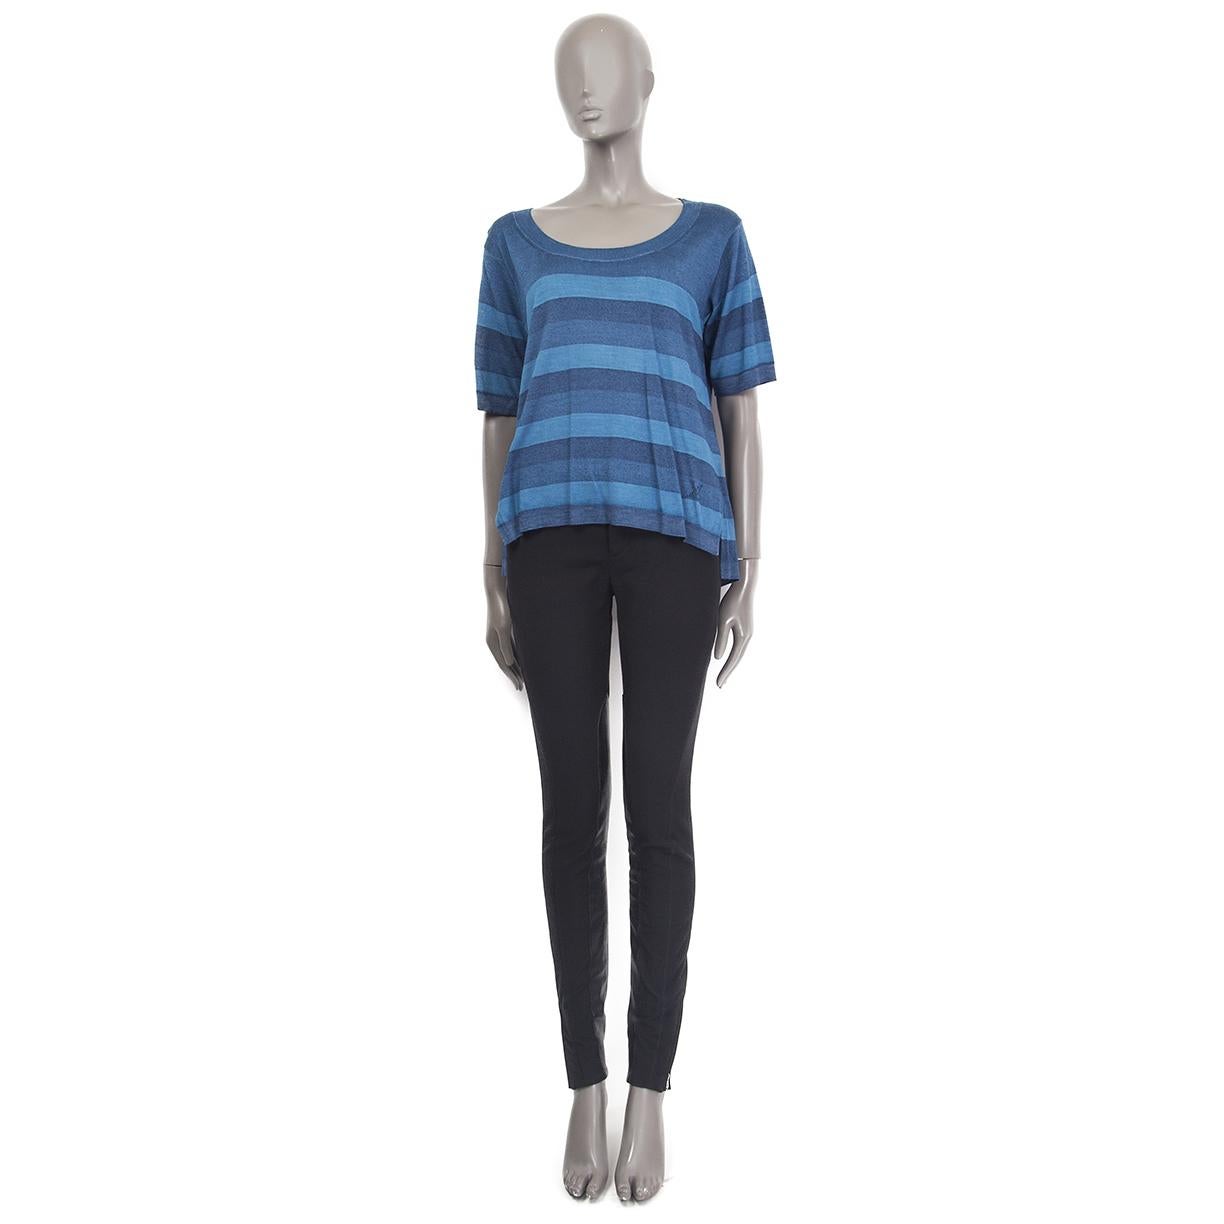 100% authentic Louis Vuitton short sleeve knit t-shirt in various shades of blue striped wool (64%) and silk (36%). Scoope neck, relaxed fit. Slit sides. Has been worn and is in excellent condition.

Measurements
Tag Size	M
Size	M
Shoulder